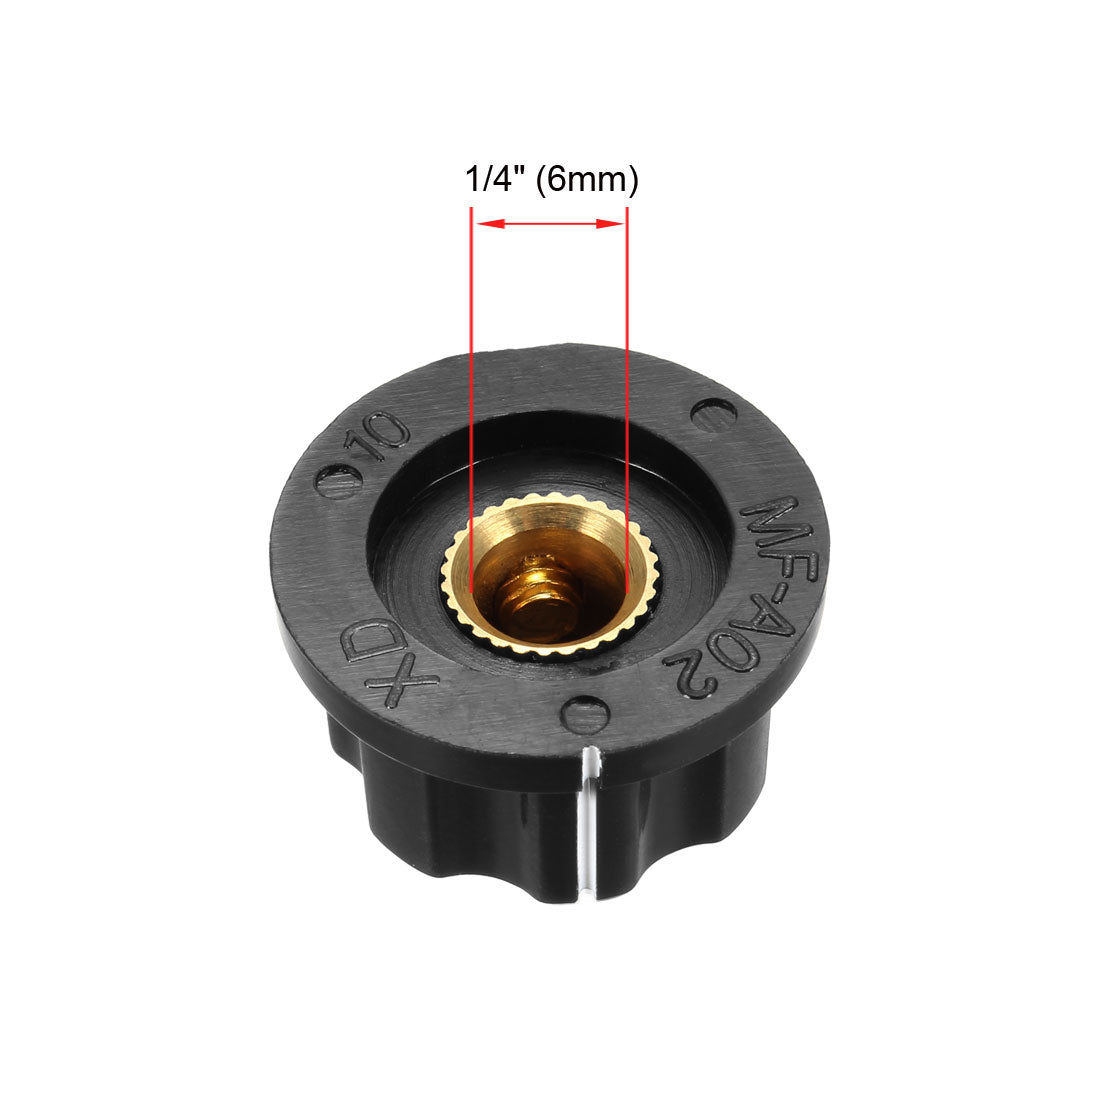 uxcell Uxcell 10Pcs Speaker Control Knob Power Amplifier Knob 23mm Dia. Rotary Knobs for 6mm Dia. Shaft Potentiometer